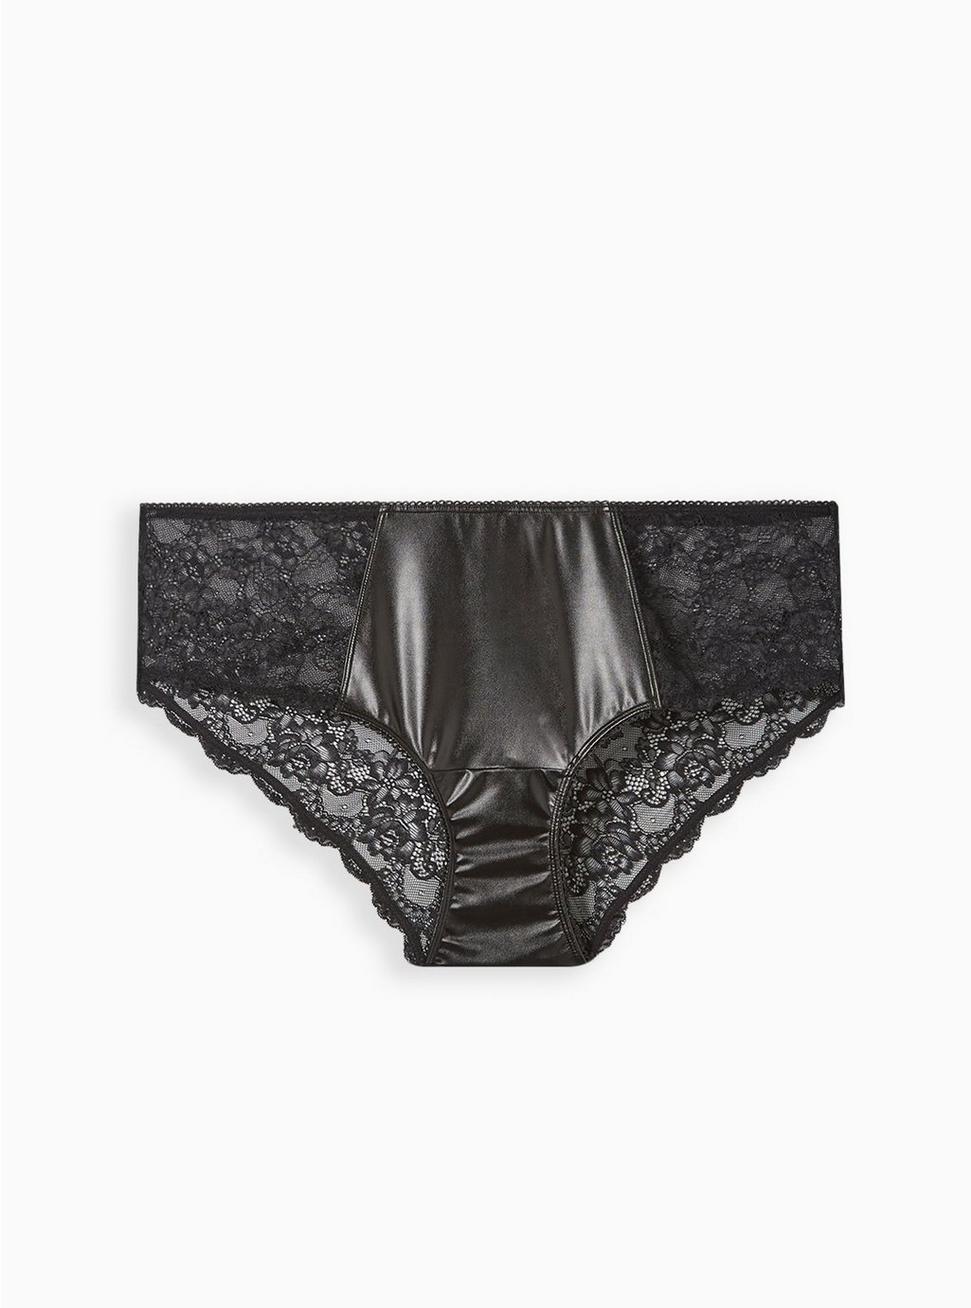 Faux Leather & Lace Mid Rise Hipster Panty, RICH BLACK, hi-res